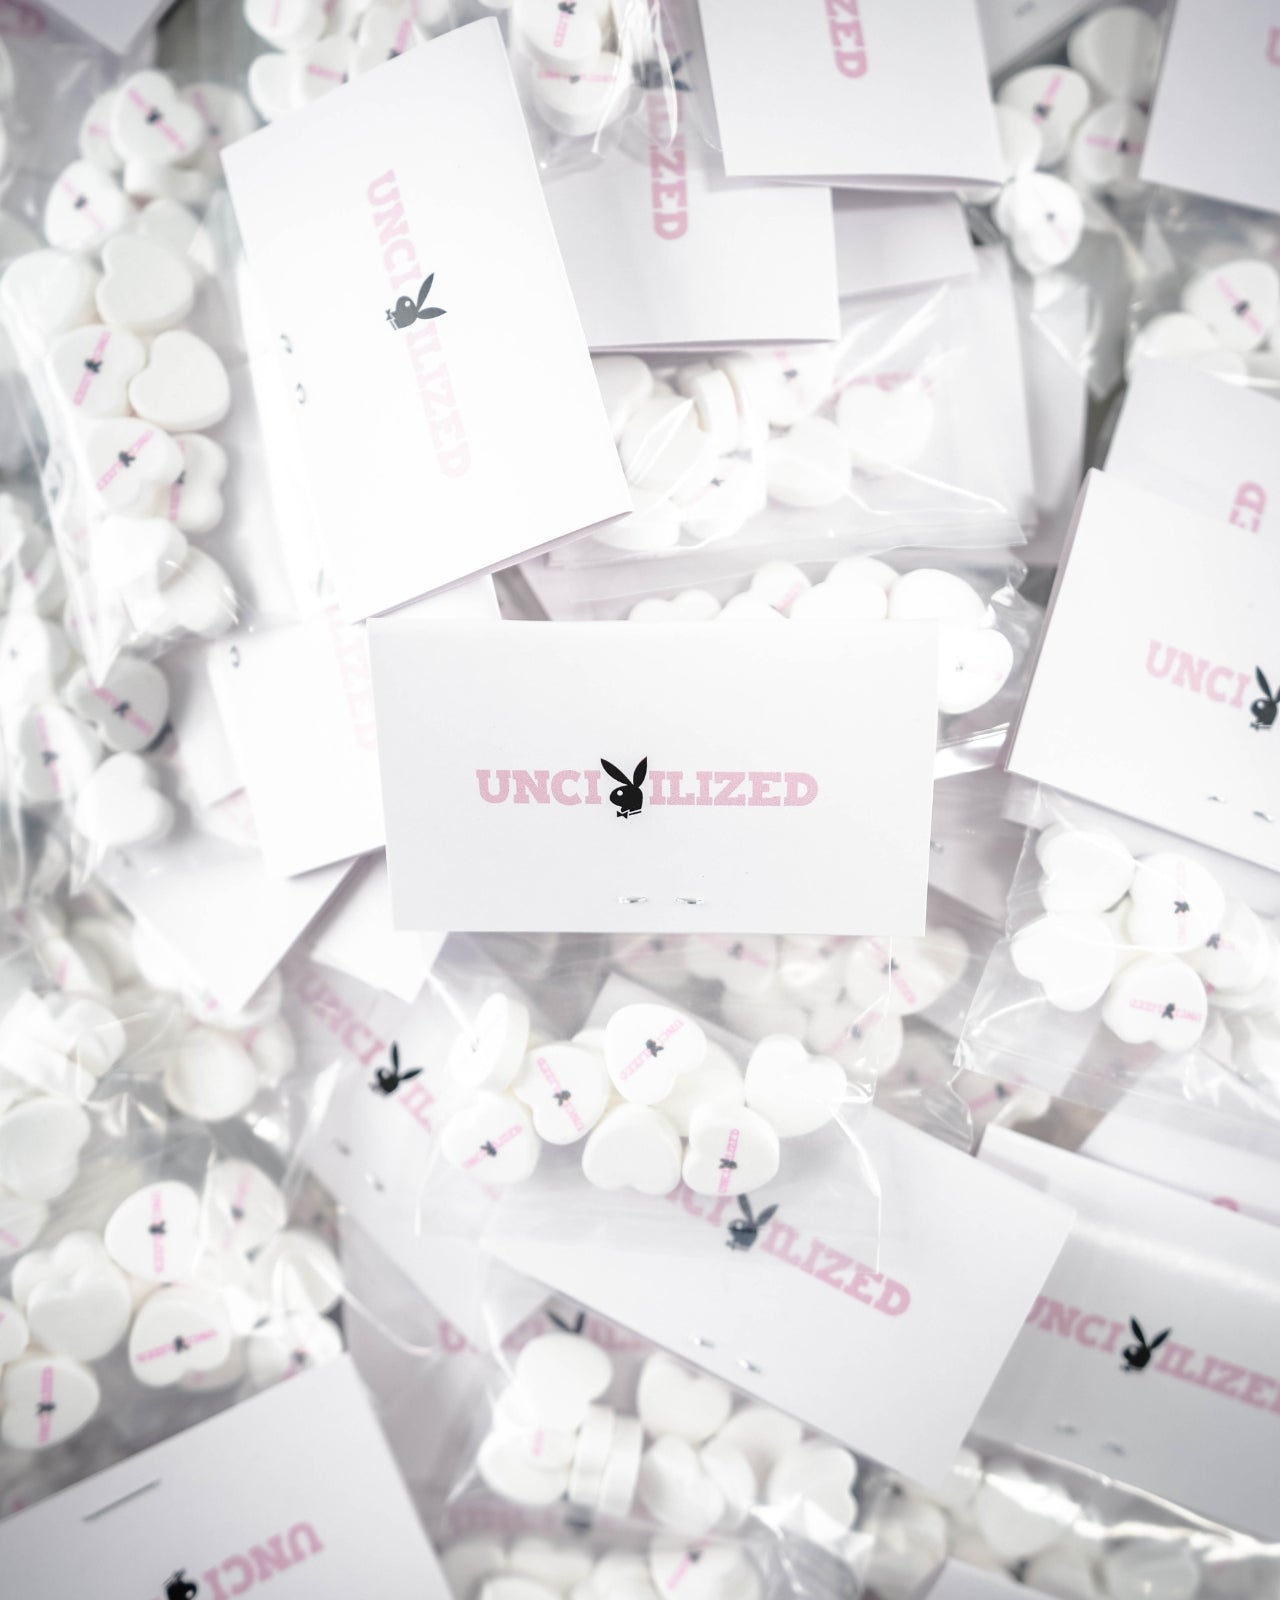 EARLY ACCESS: UNCIVILIZED "PLAYBOY" HOODIE